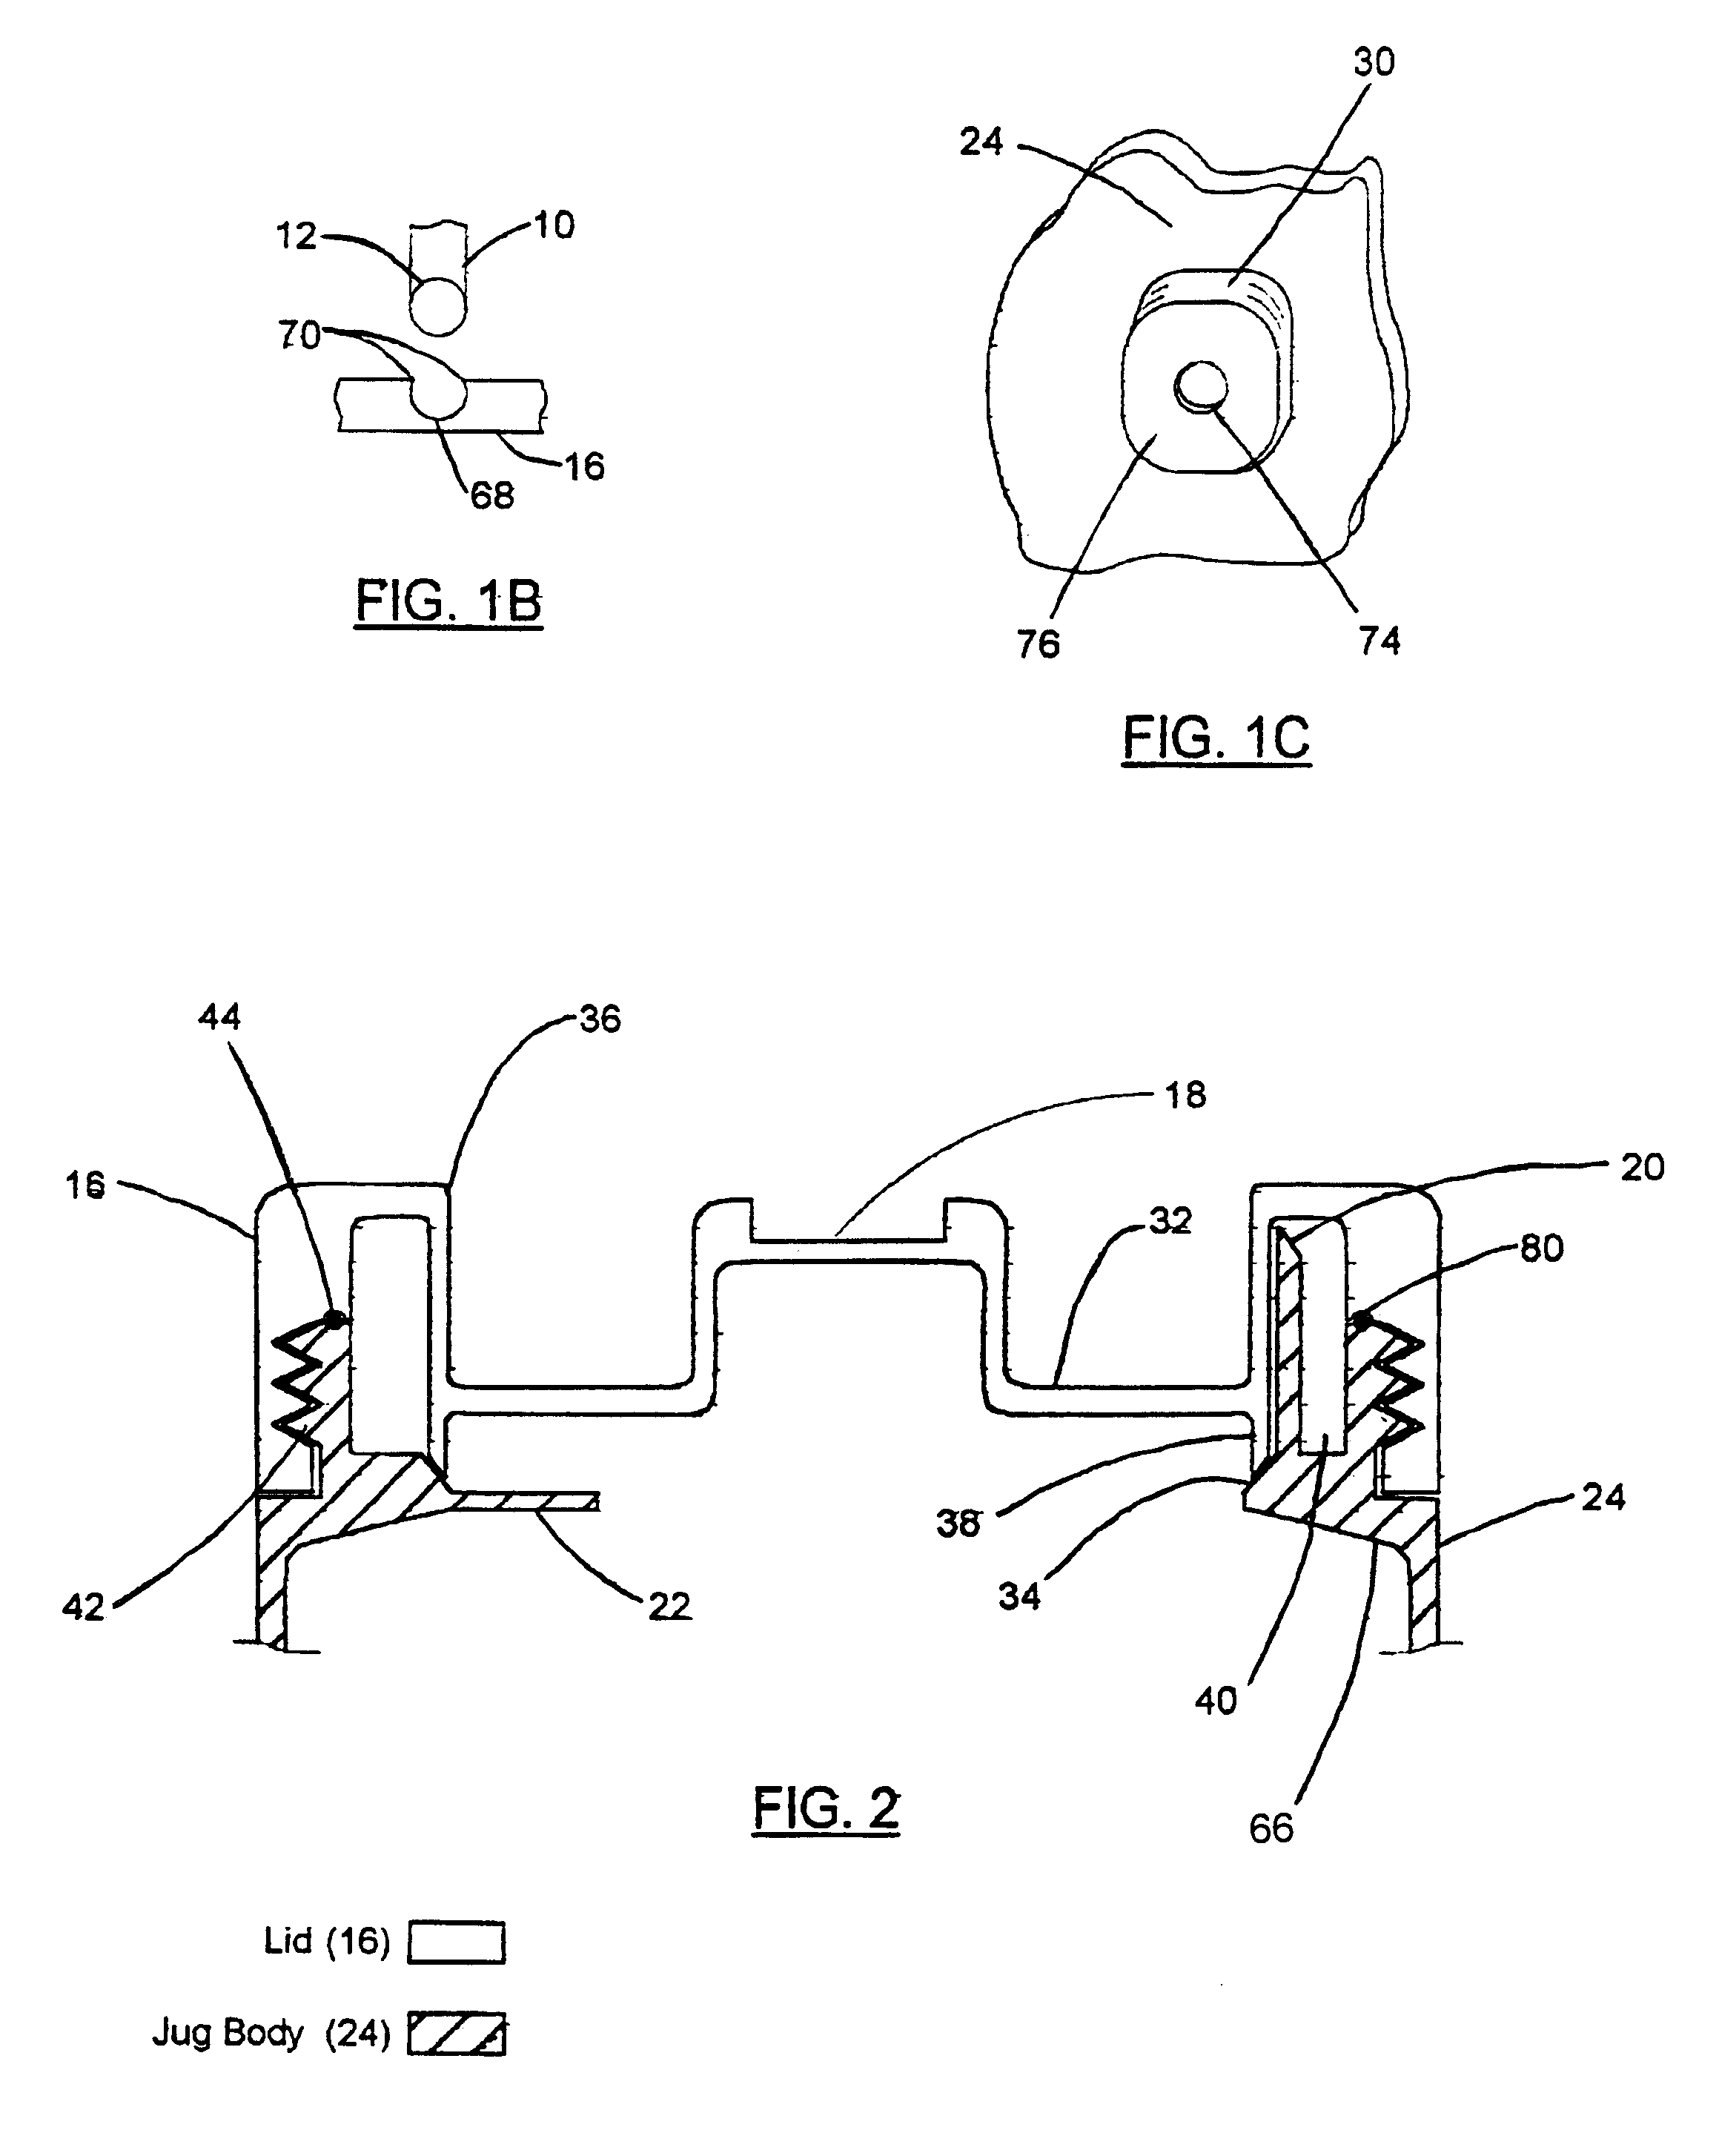 Storage and dispensing container for viscous fluids, paints and the like, and method of minimizing dripping